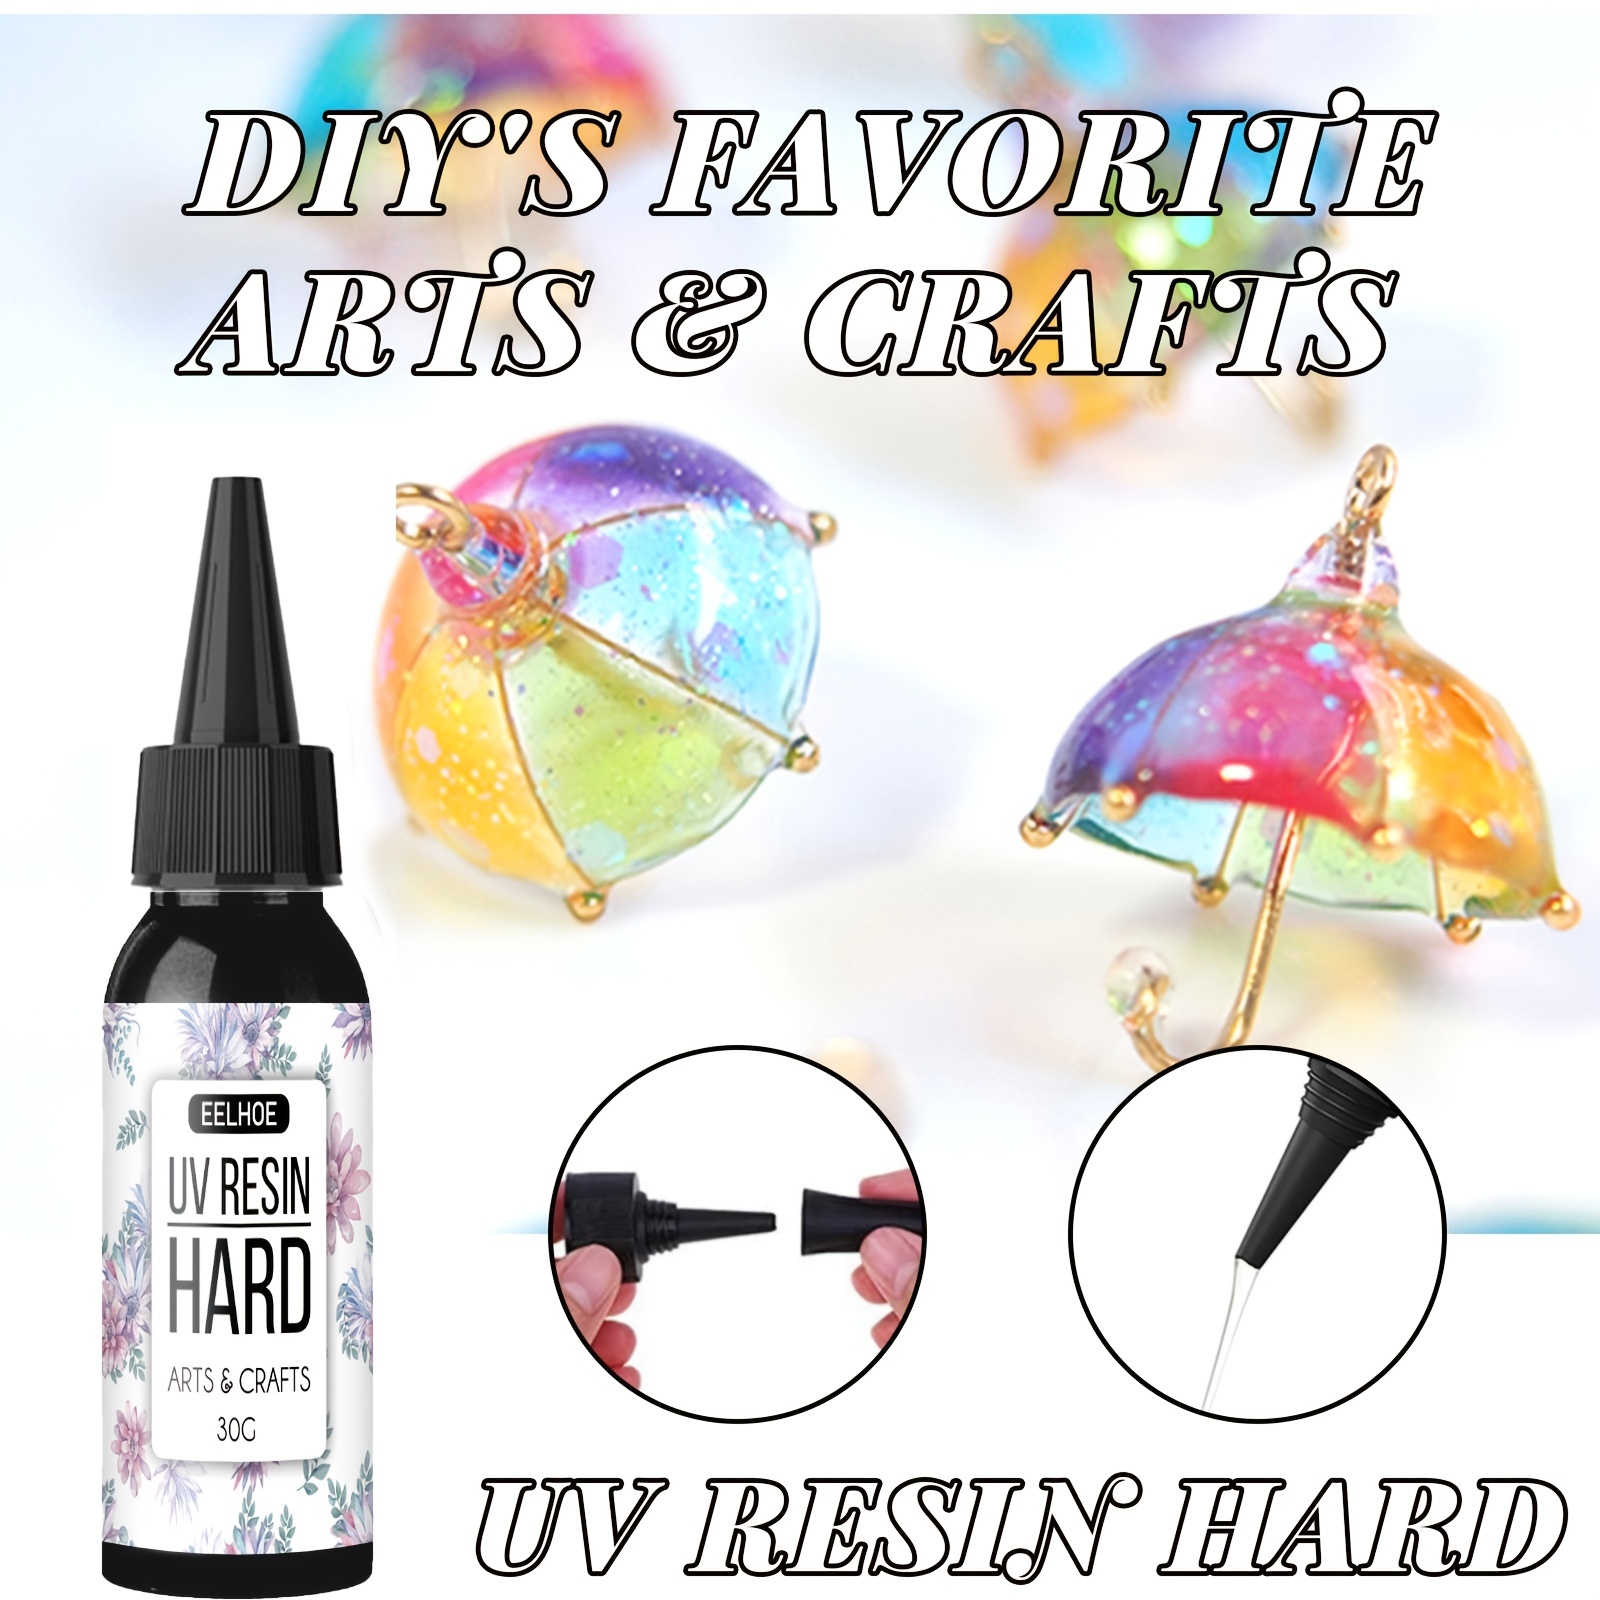 500g UV Resin+30g-Upgrade I Minute Quick Cure! Hard Type Crystal Clear Epoxy Resin, UV Glue Ultraviolet Curing, Solar Cure Sunlight Activated Resin